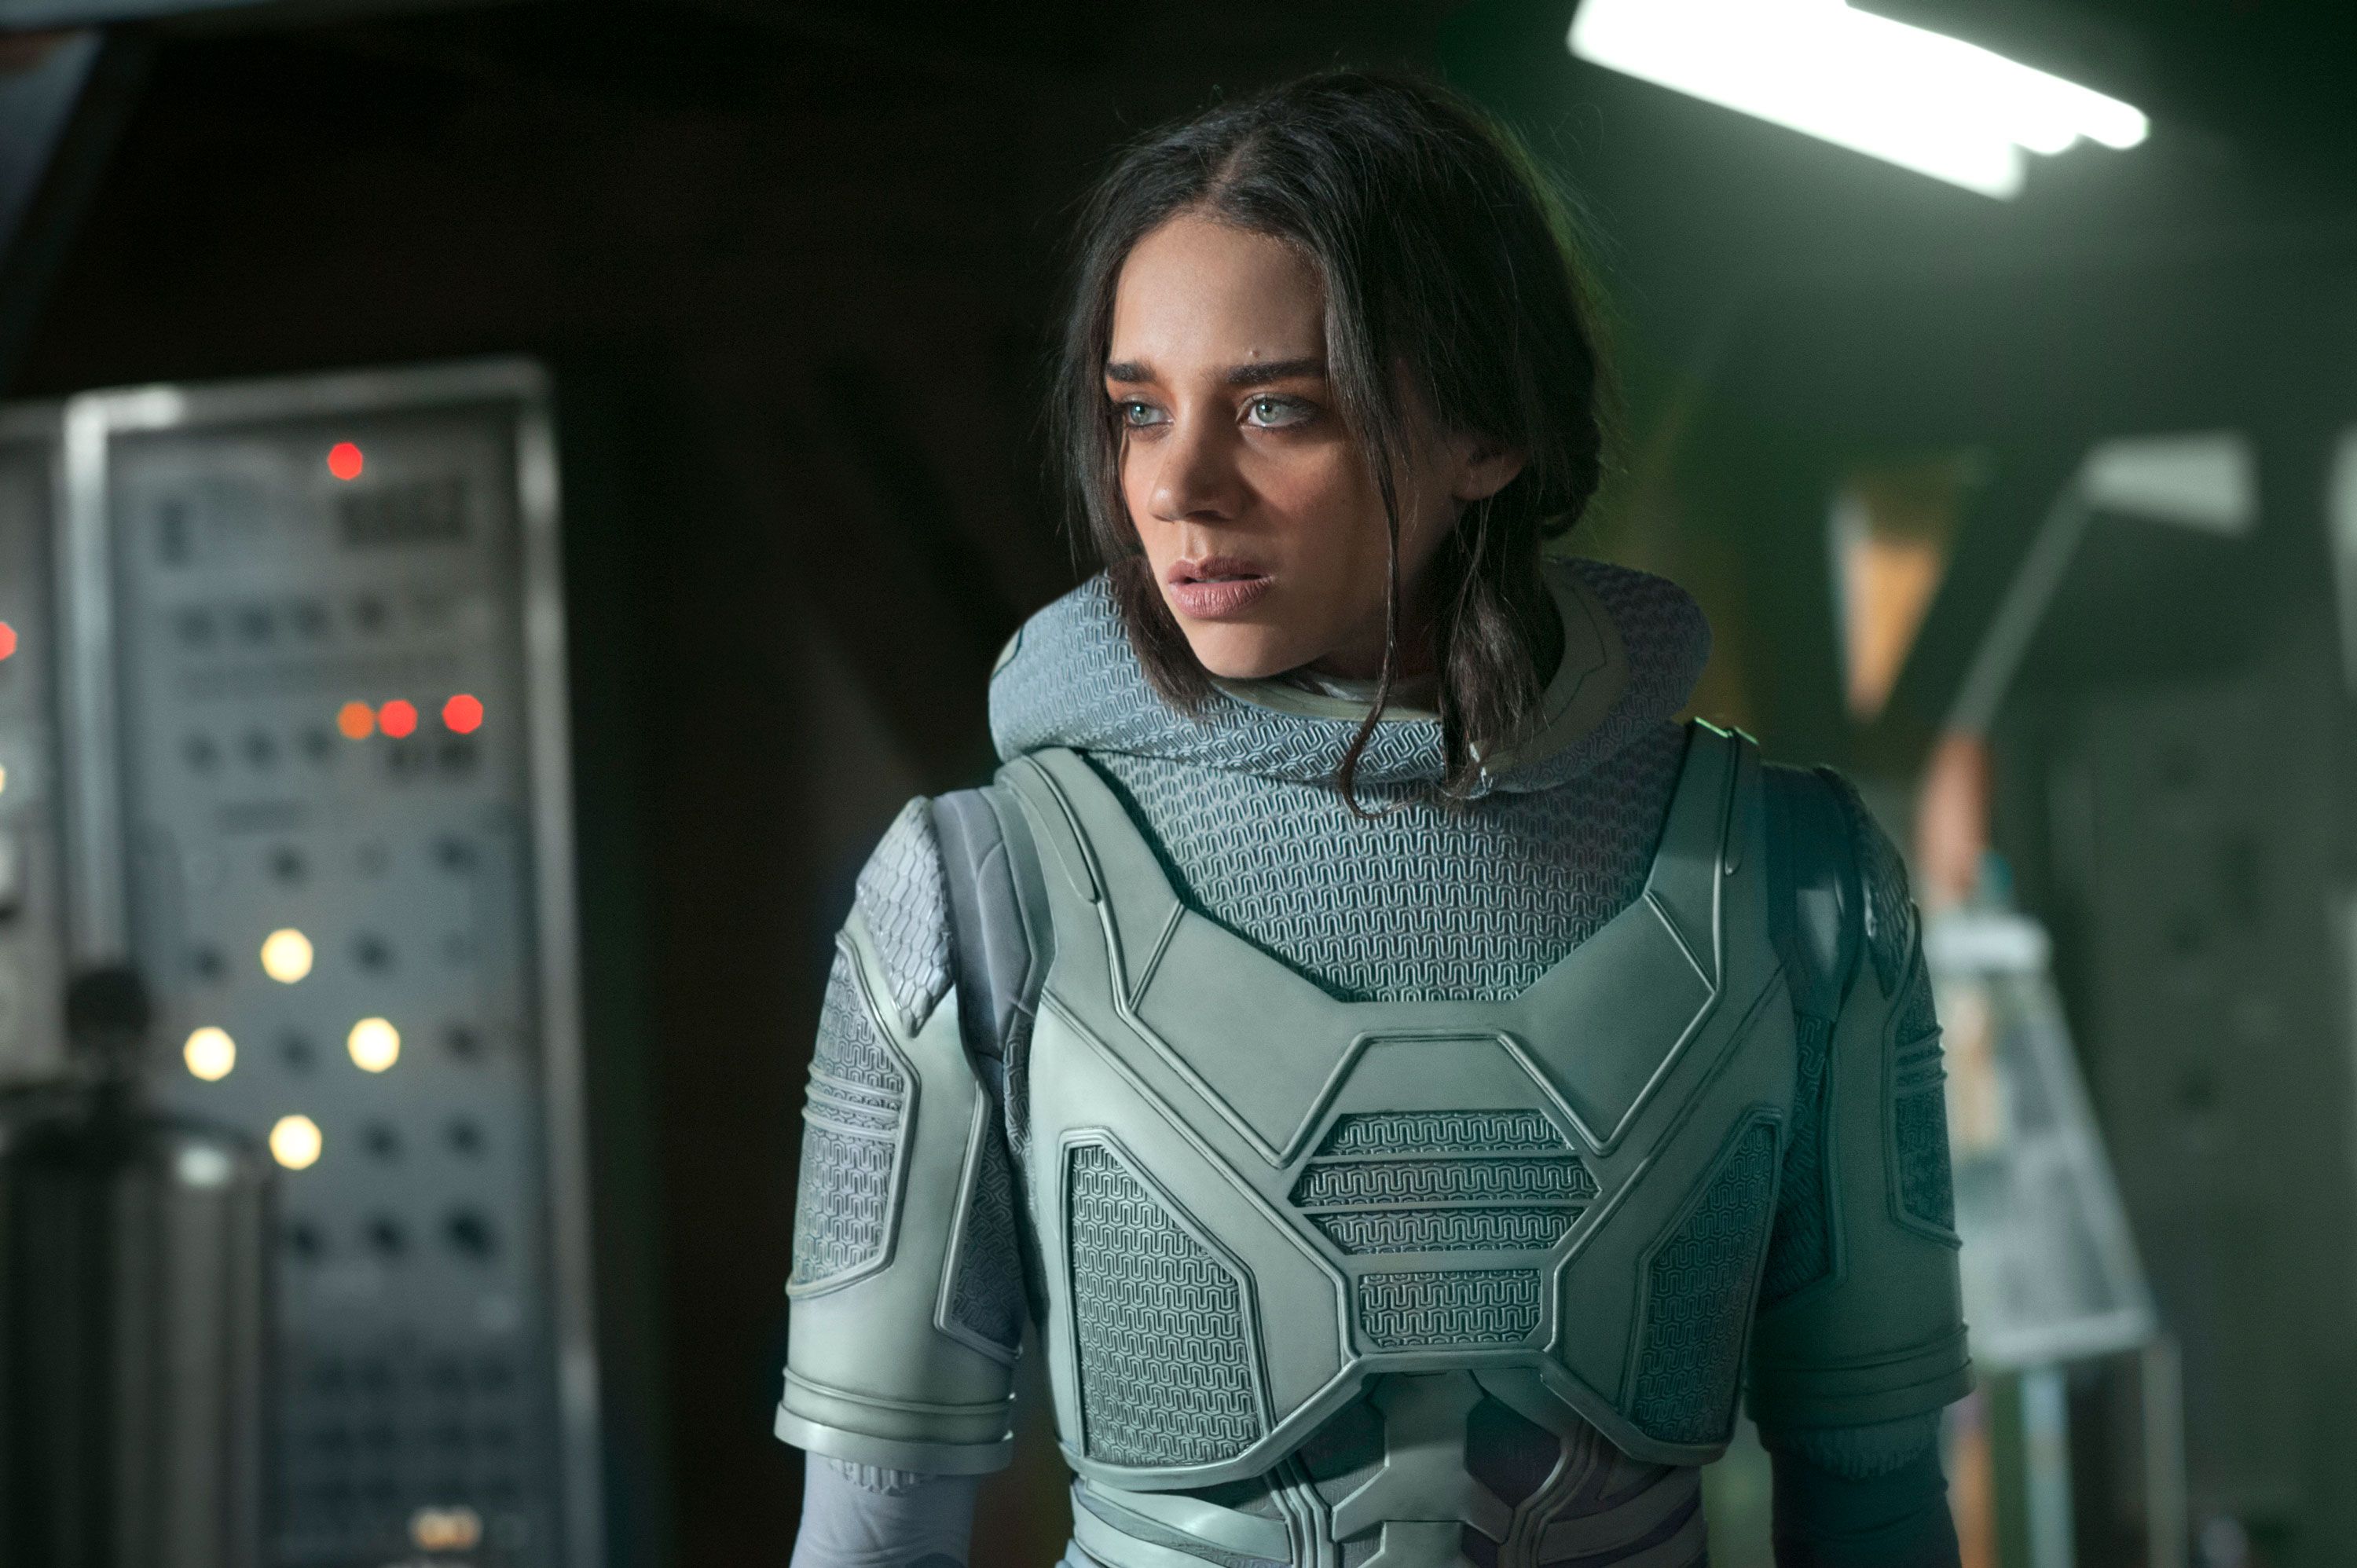 Ant-Man and the Wasp cast: Who stars in Ant-Man and the Wasp